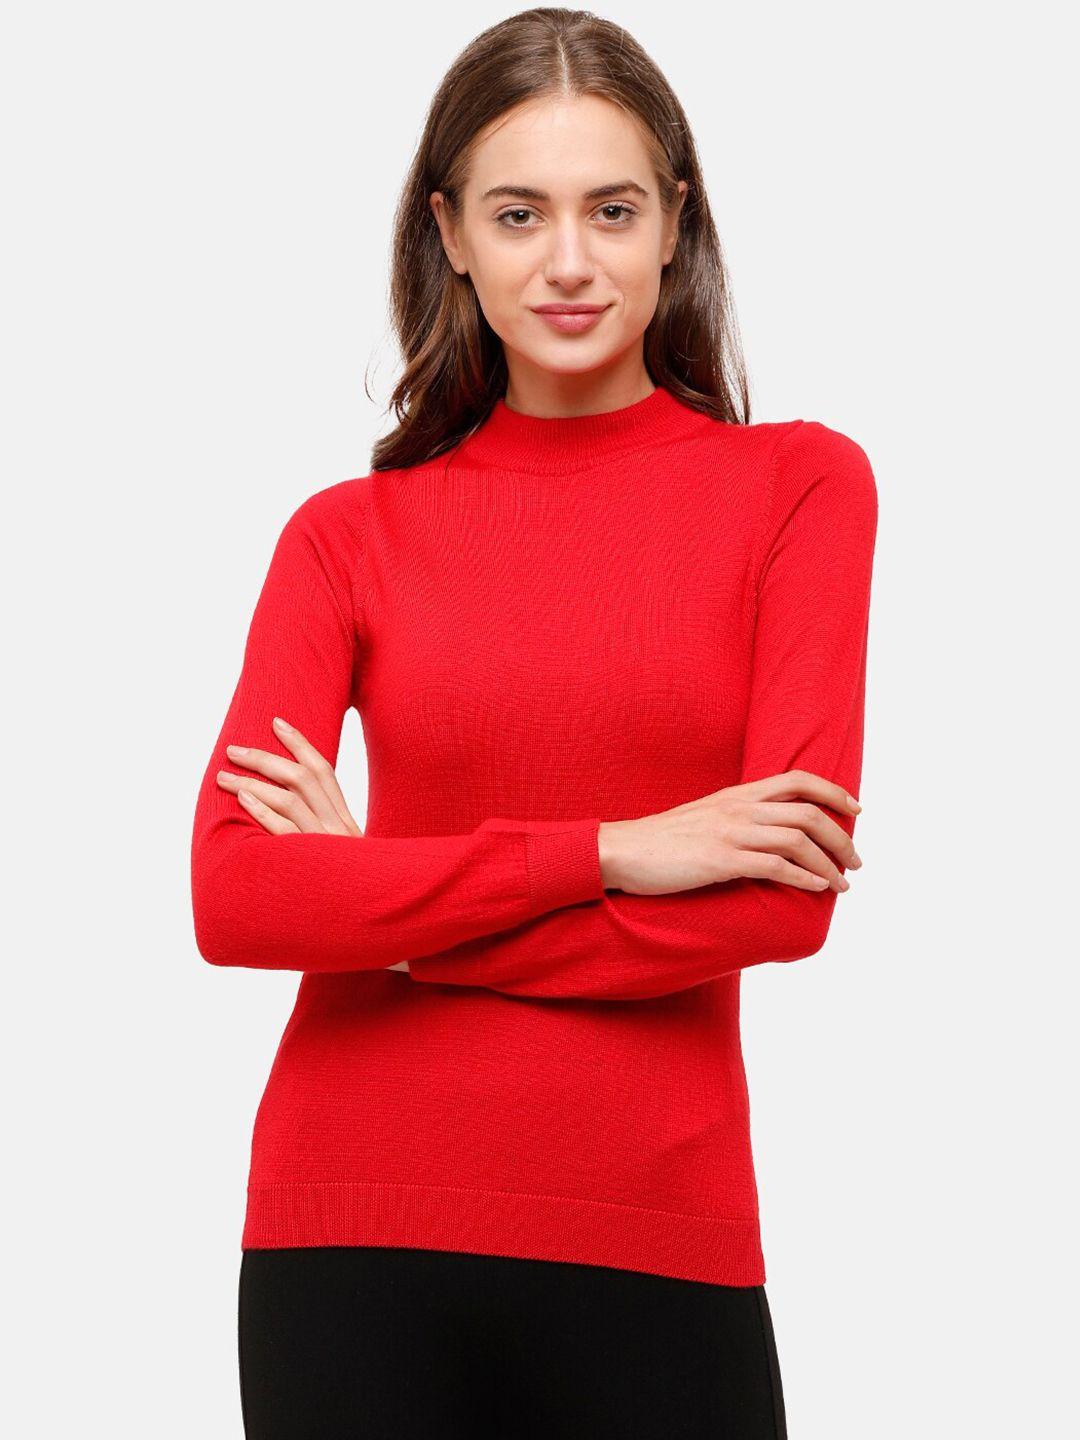 98 degree north women red pullover sweater